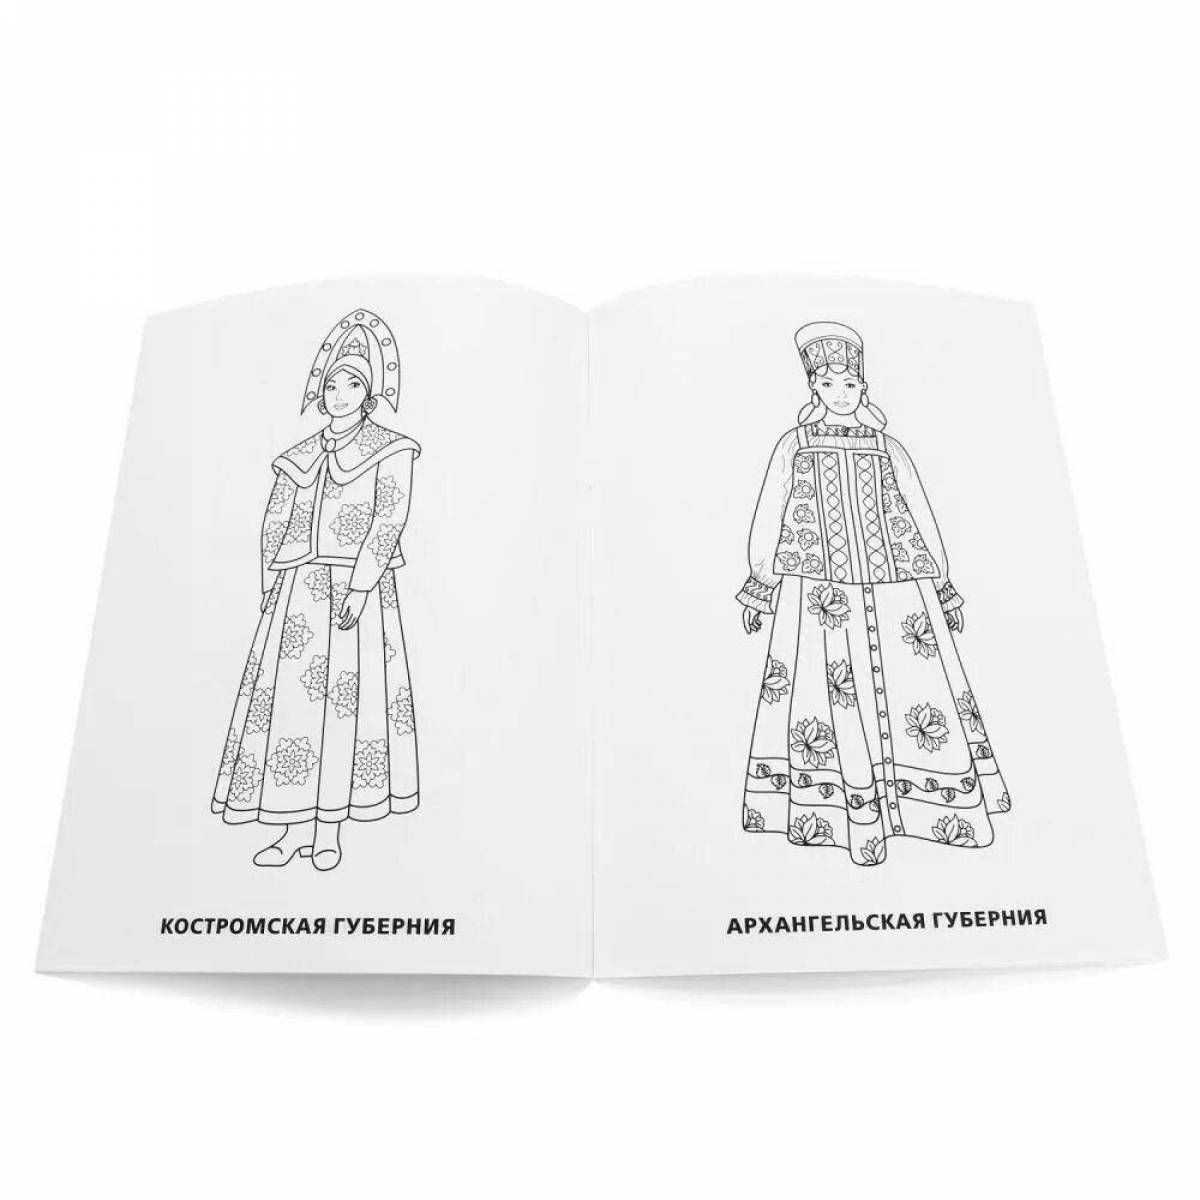 Charming coloring book in folk costume